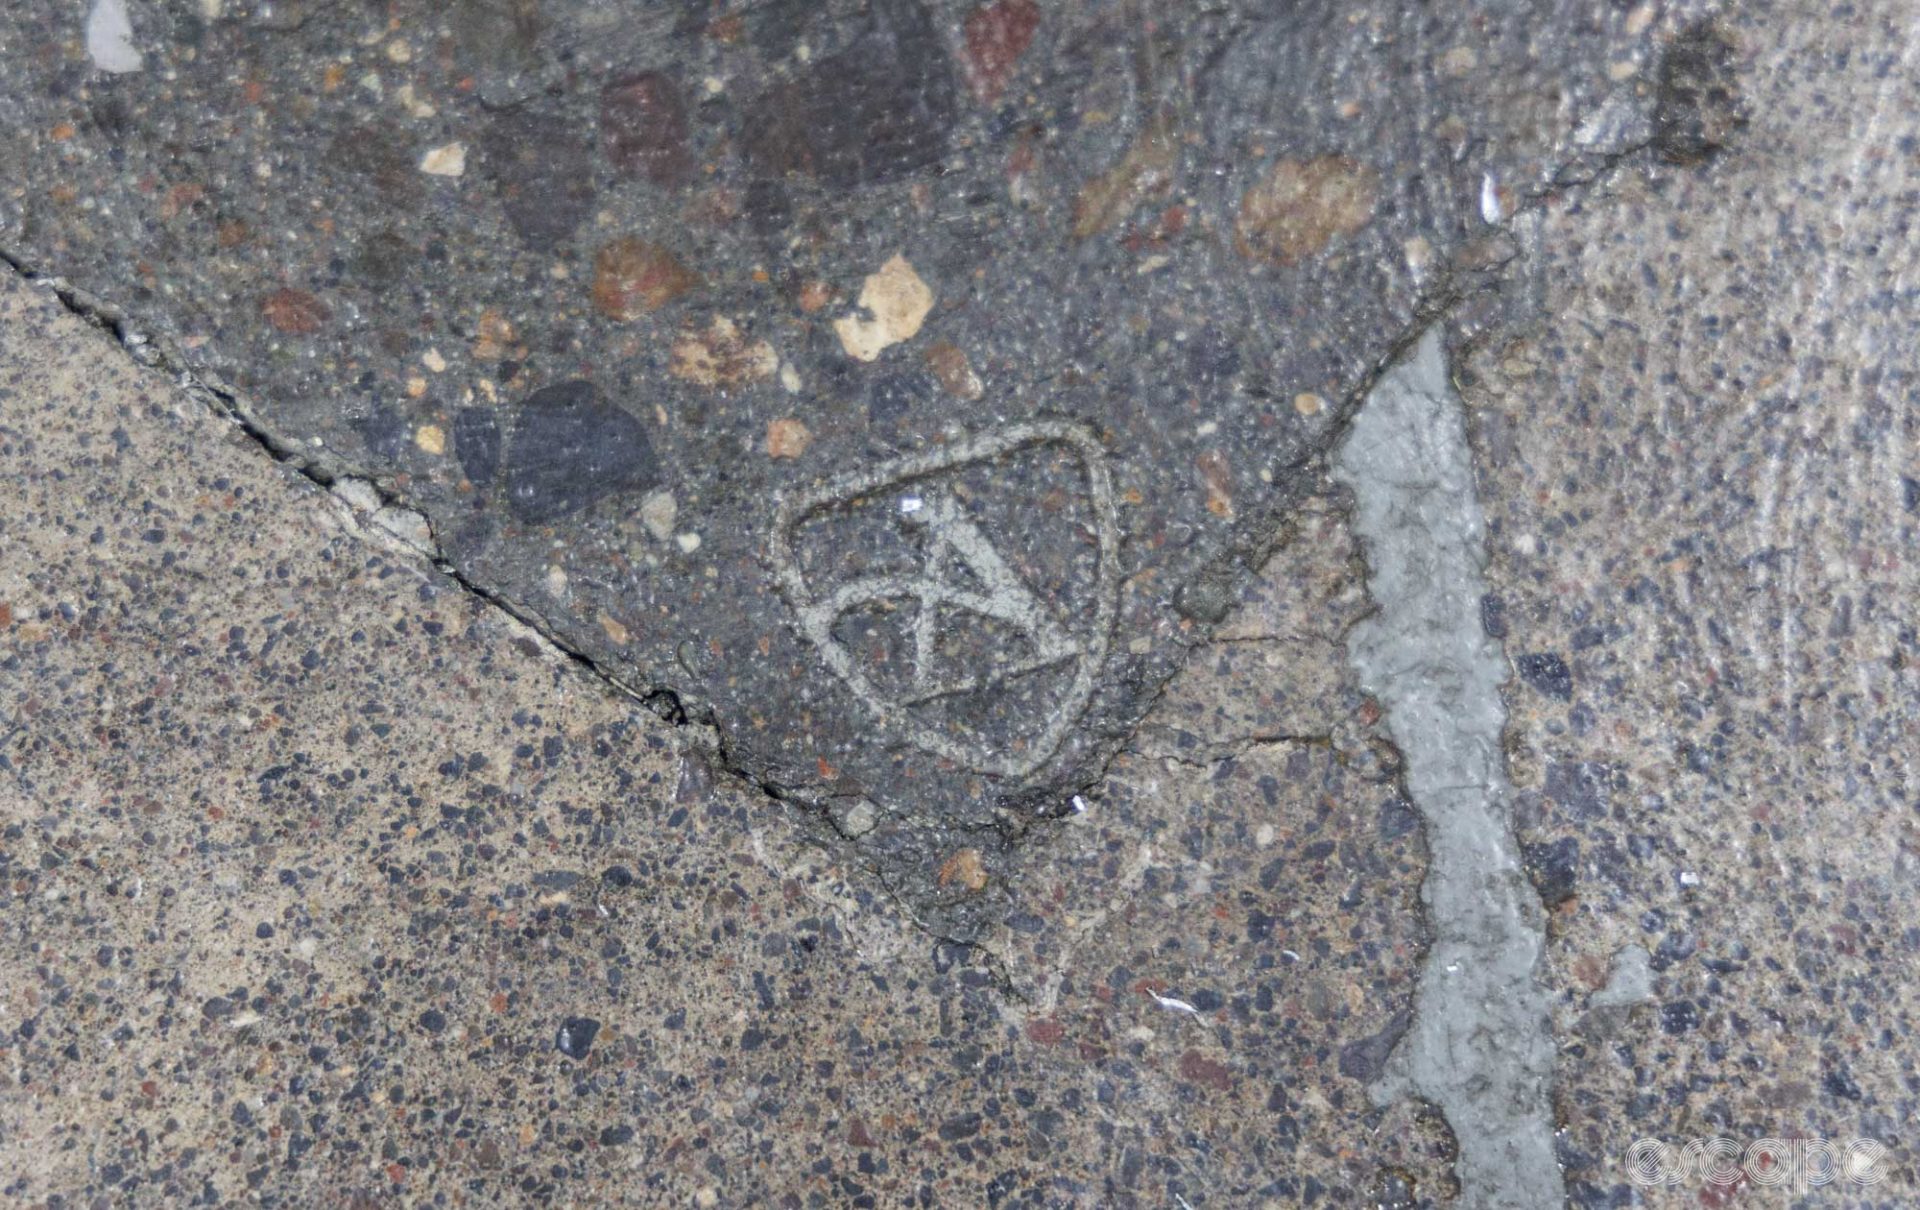 The Abbey logo stamped into the concrete.